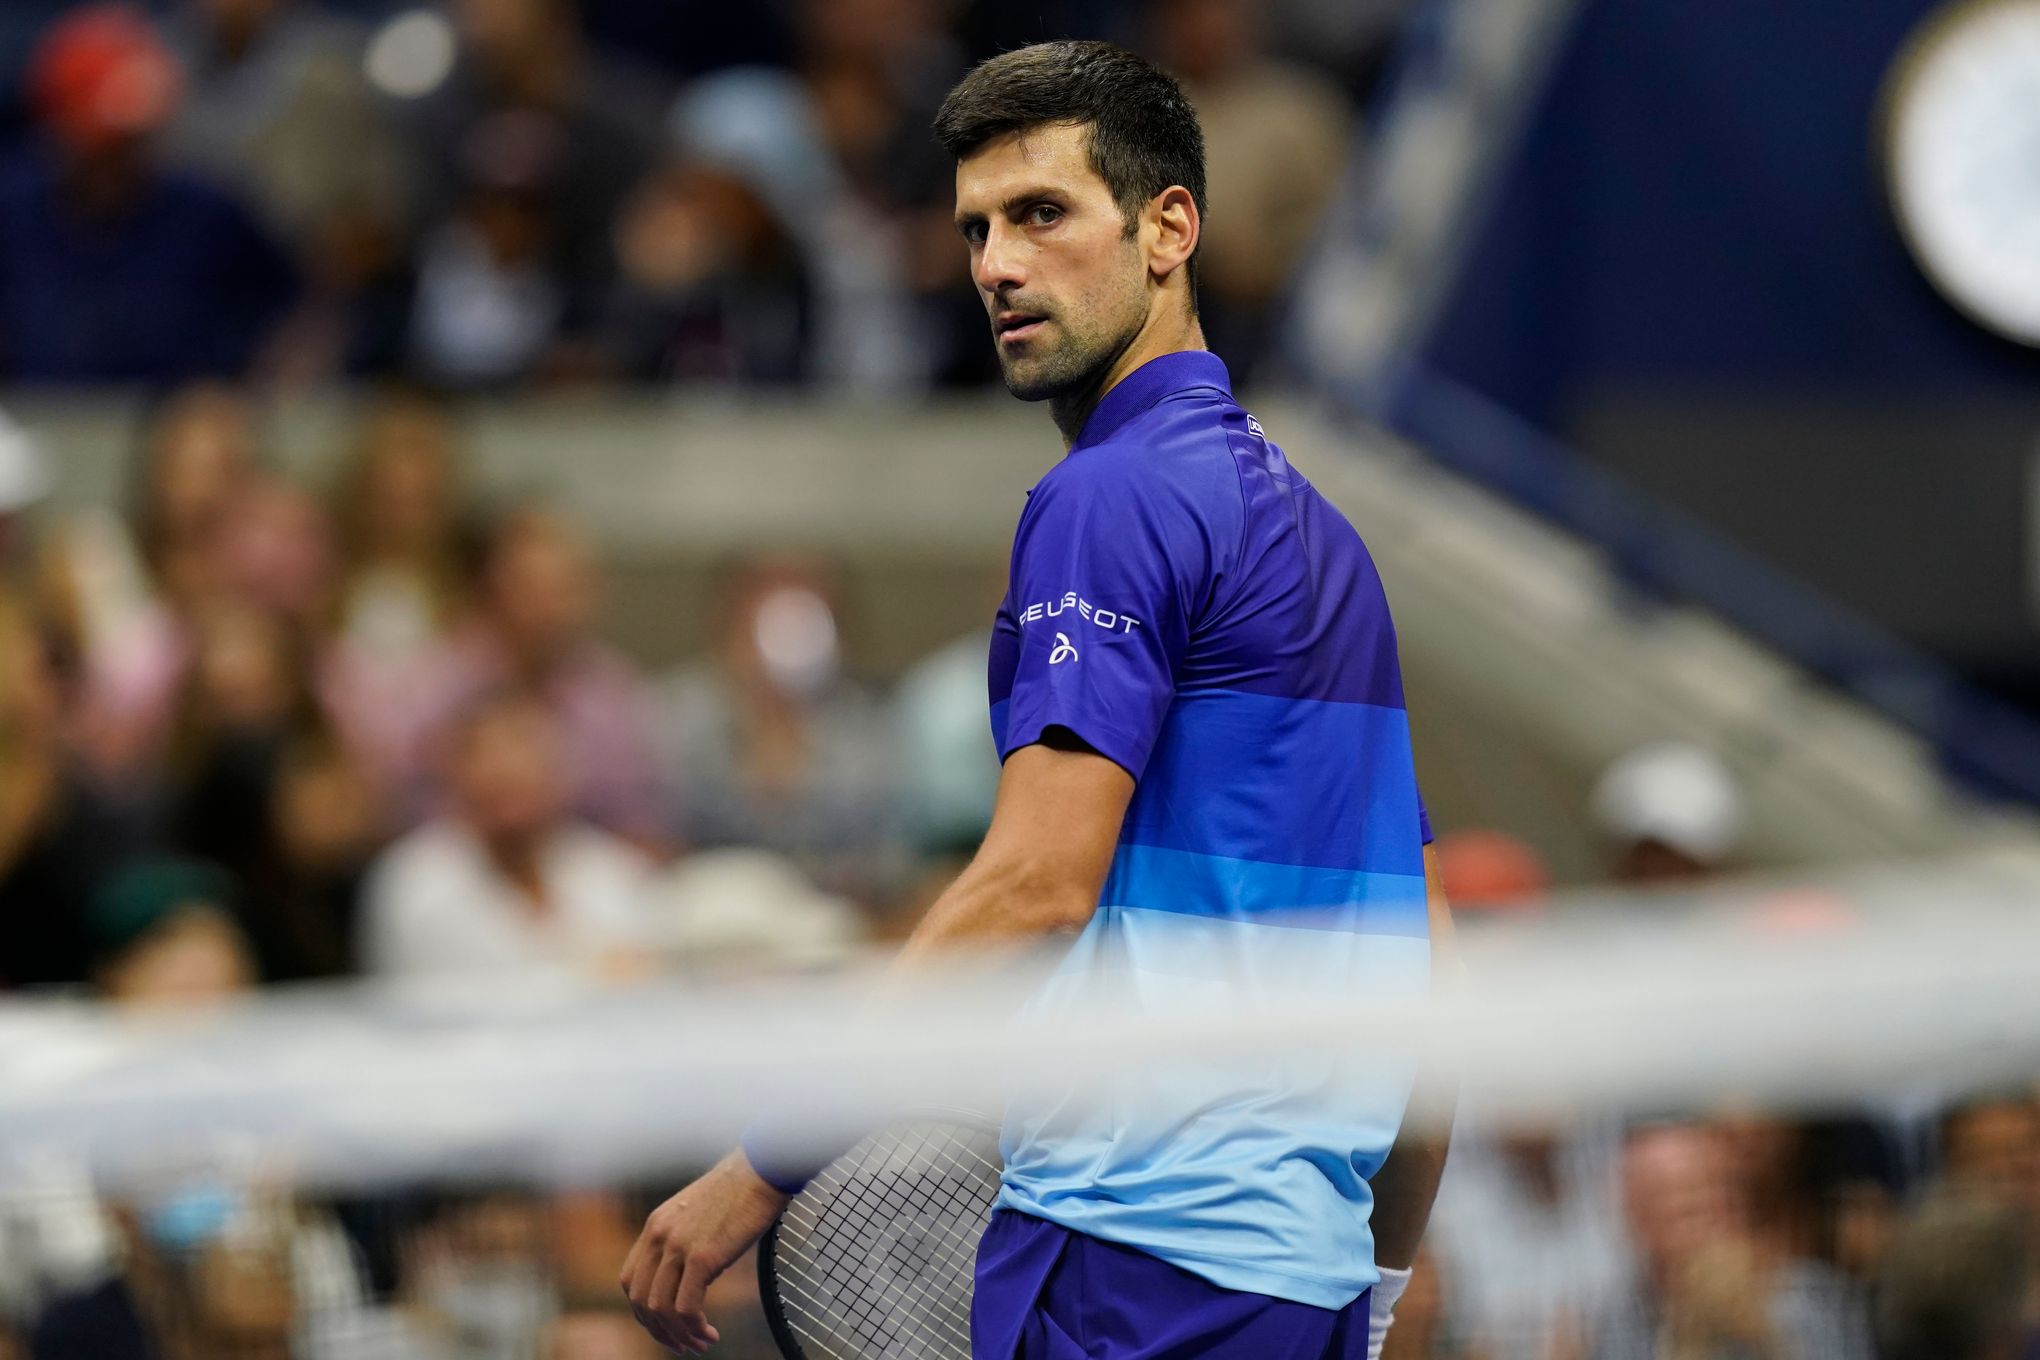 Rain Delays Matches in Italian Open but Djokovic and Top Seeds